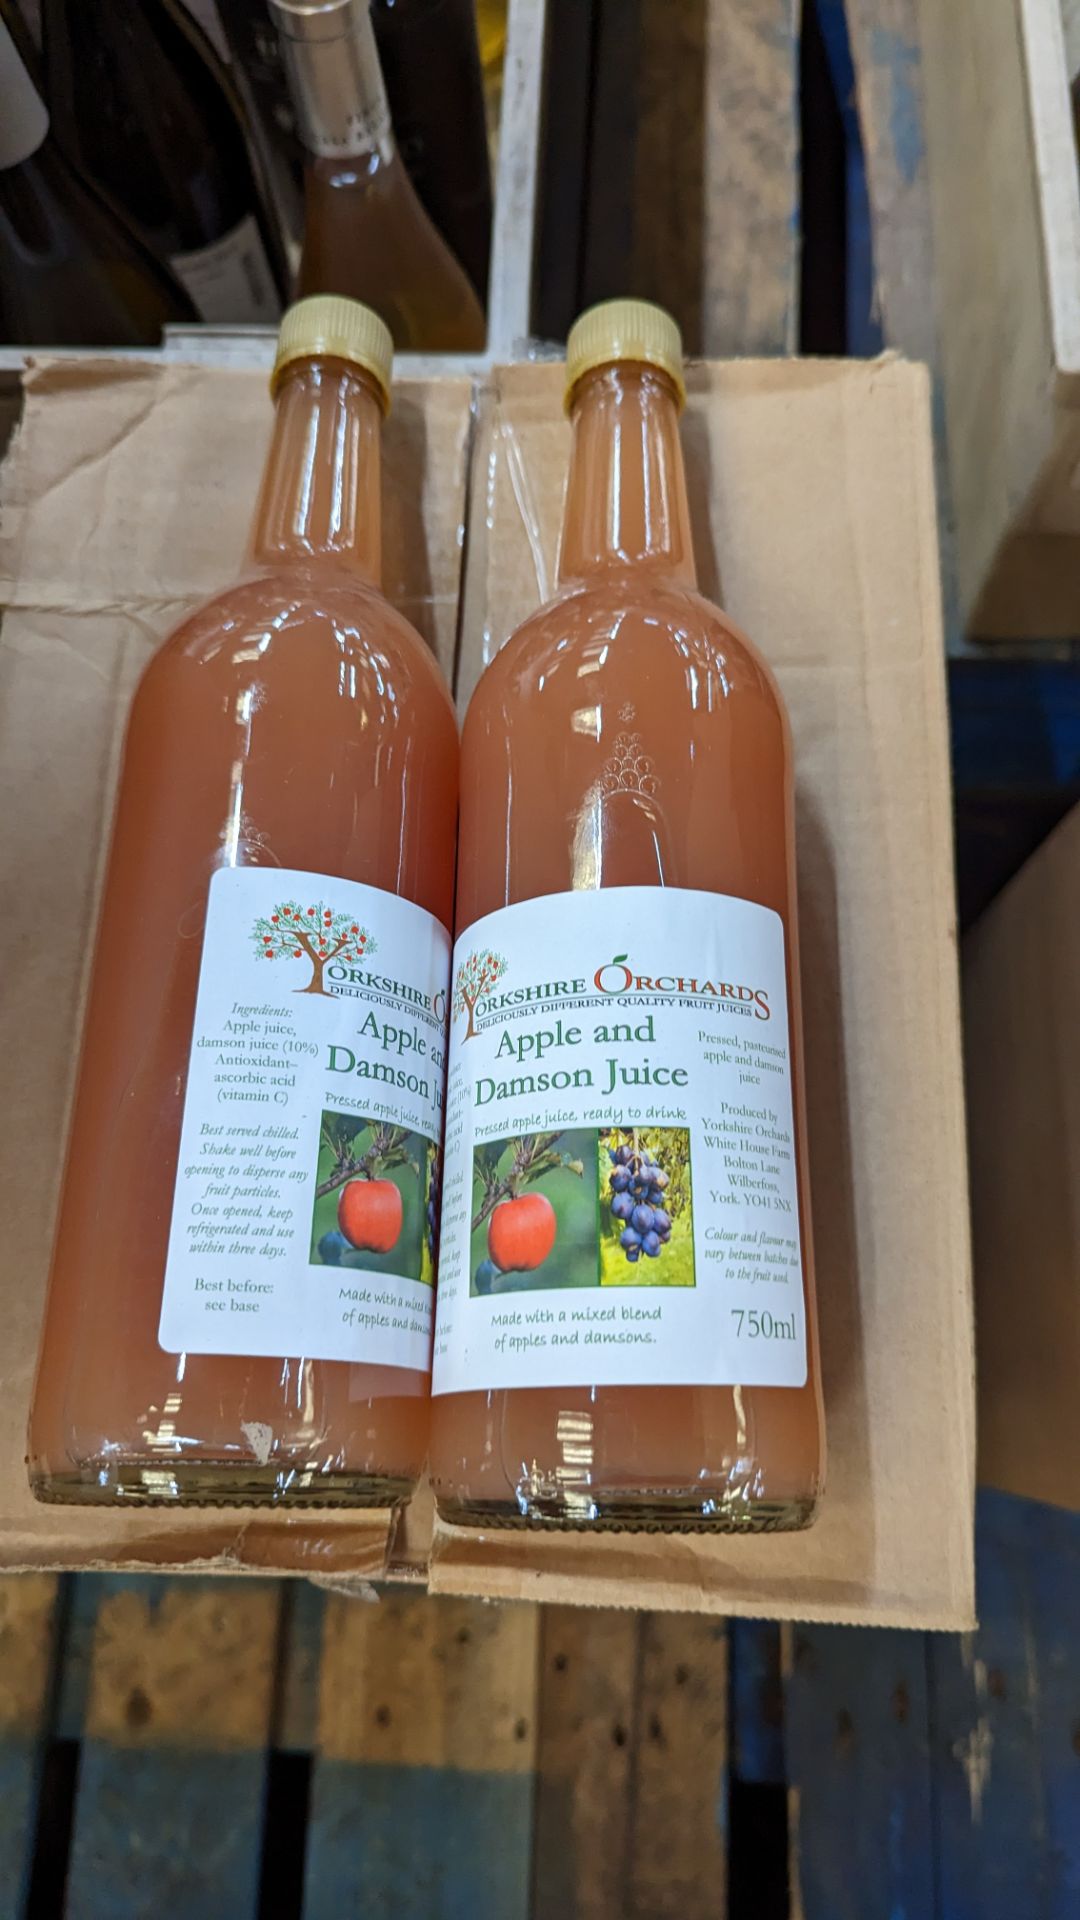 26 off 750ml bottles of Yorkshire Orchards apple & damson juice - Image 4 of 5